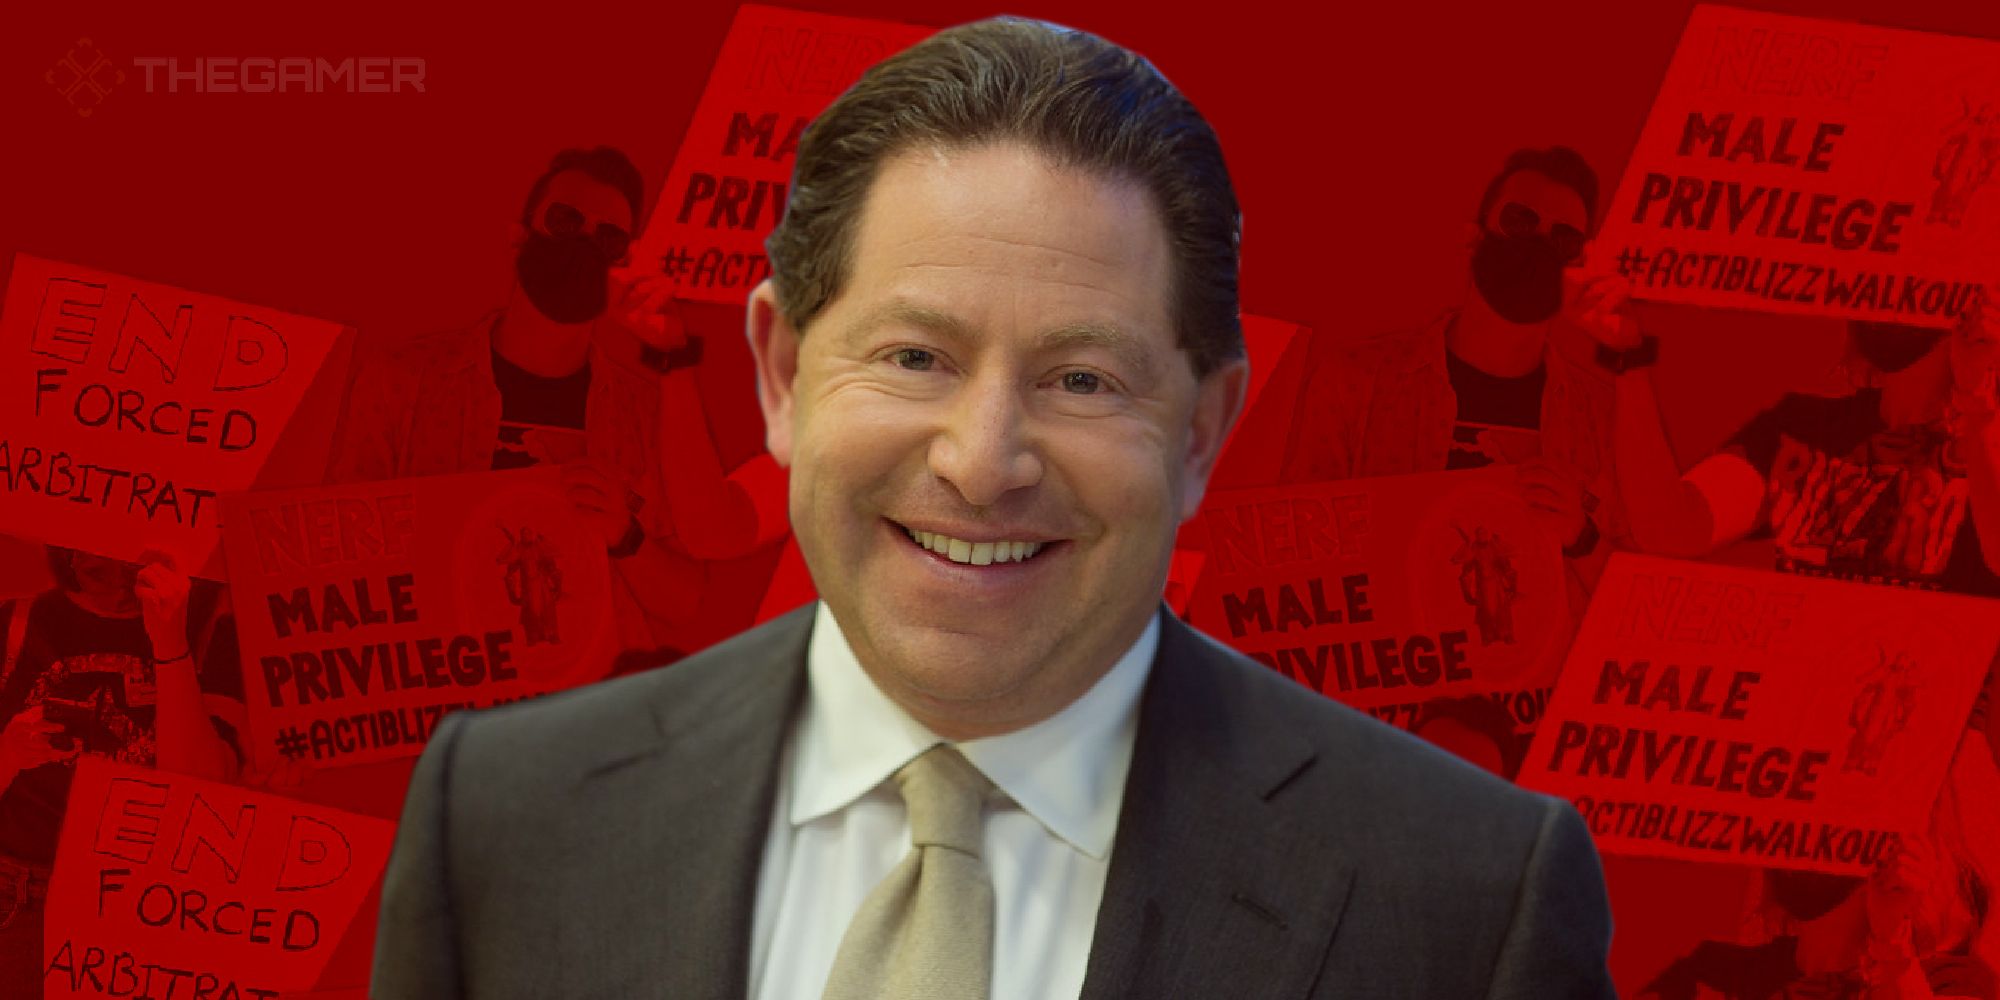 activision blizzard ceo bobby kotick in front of signs that say male privilige